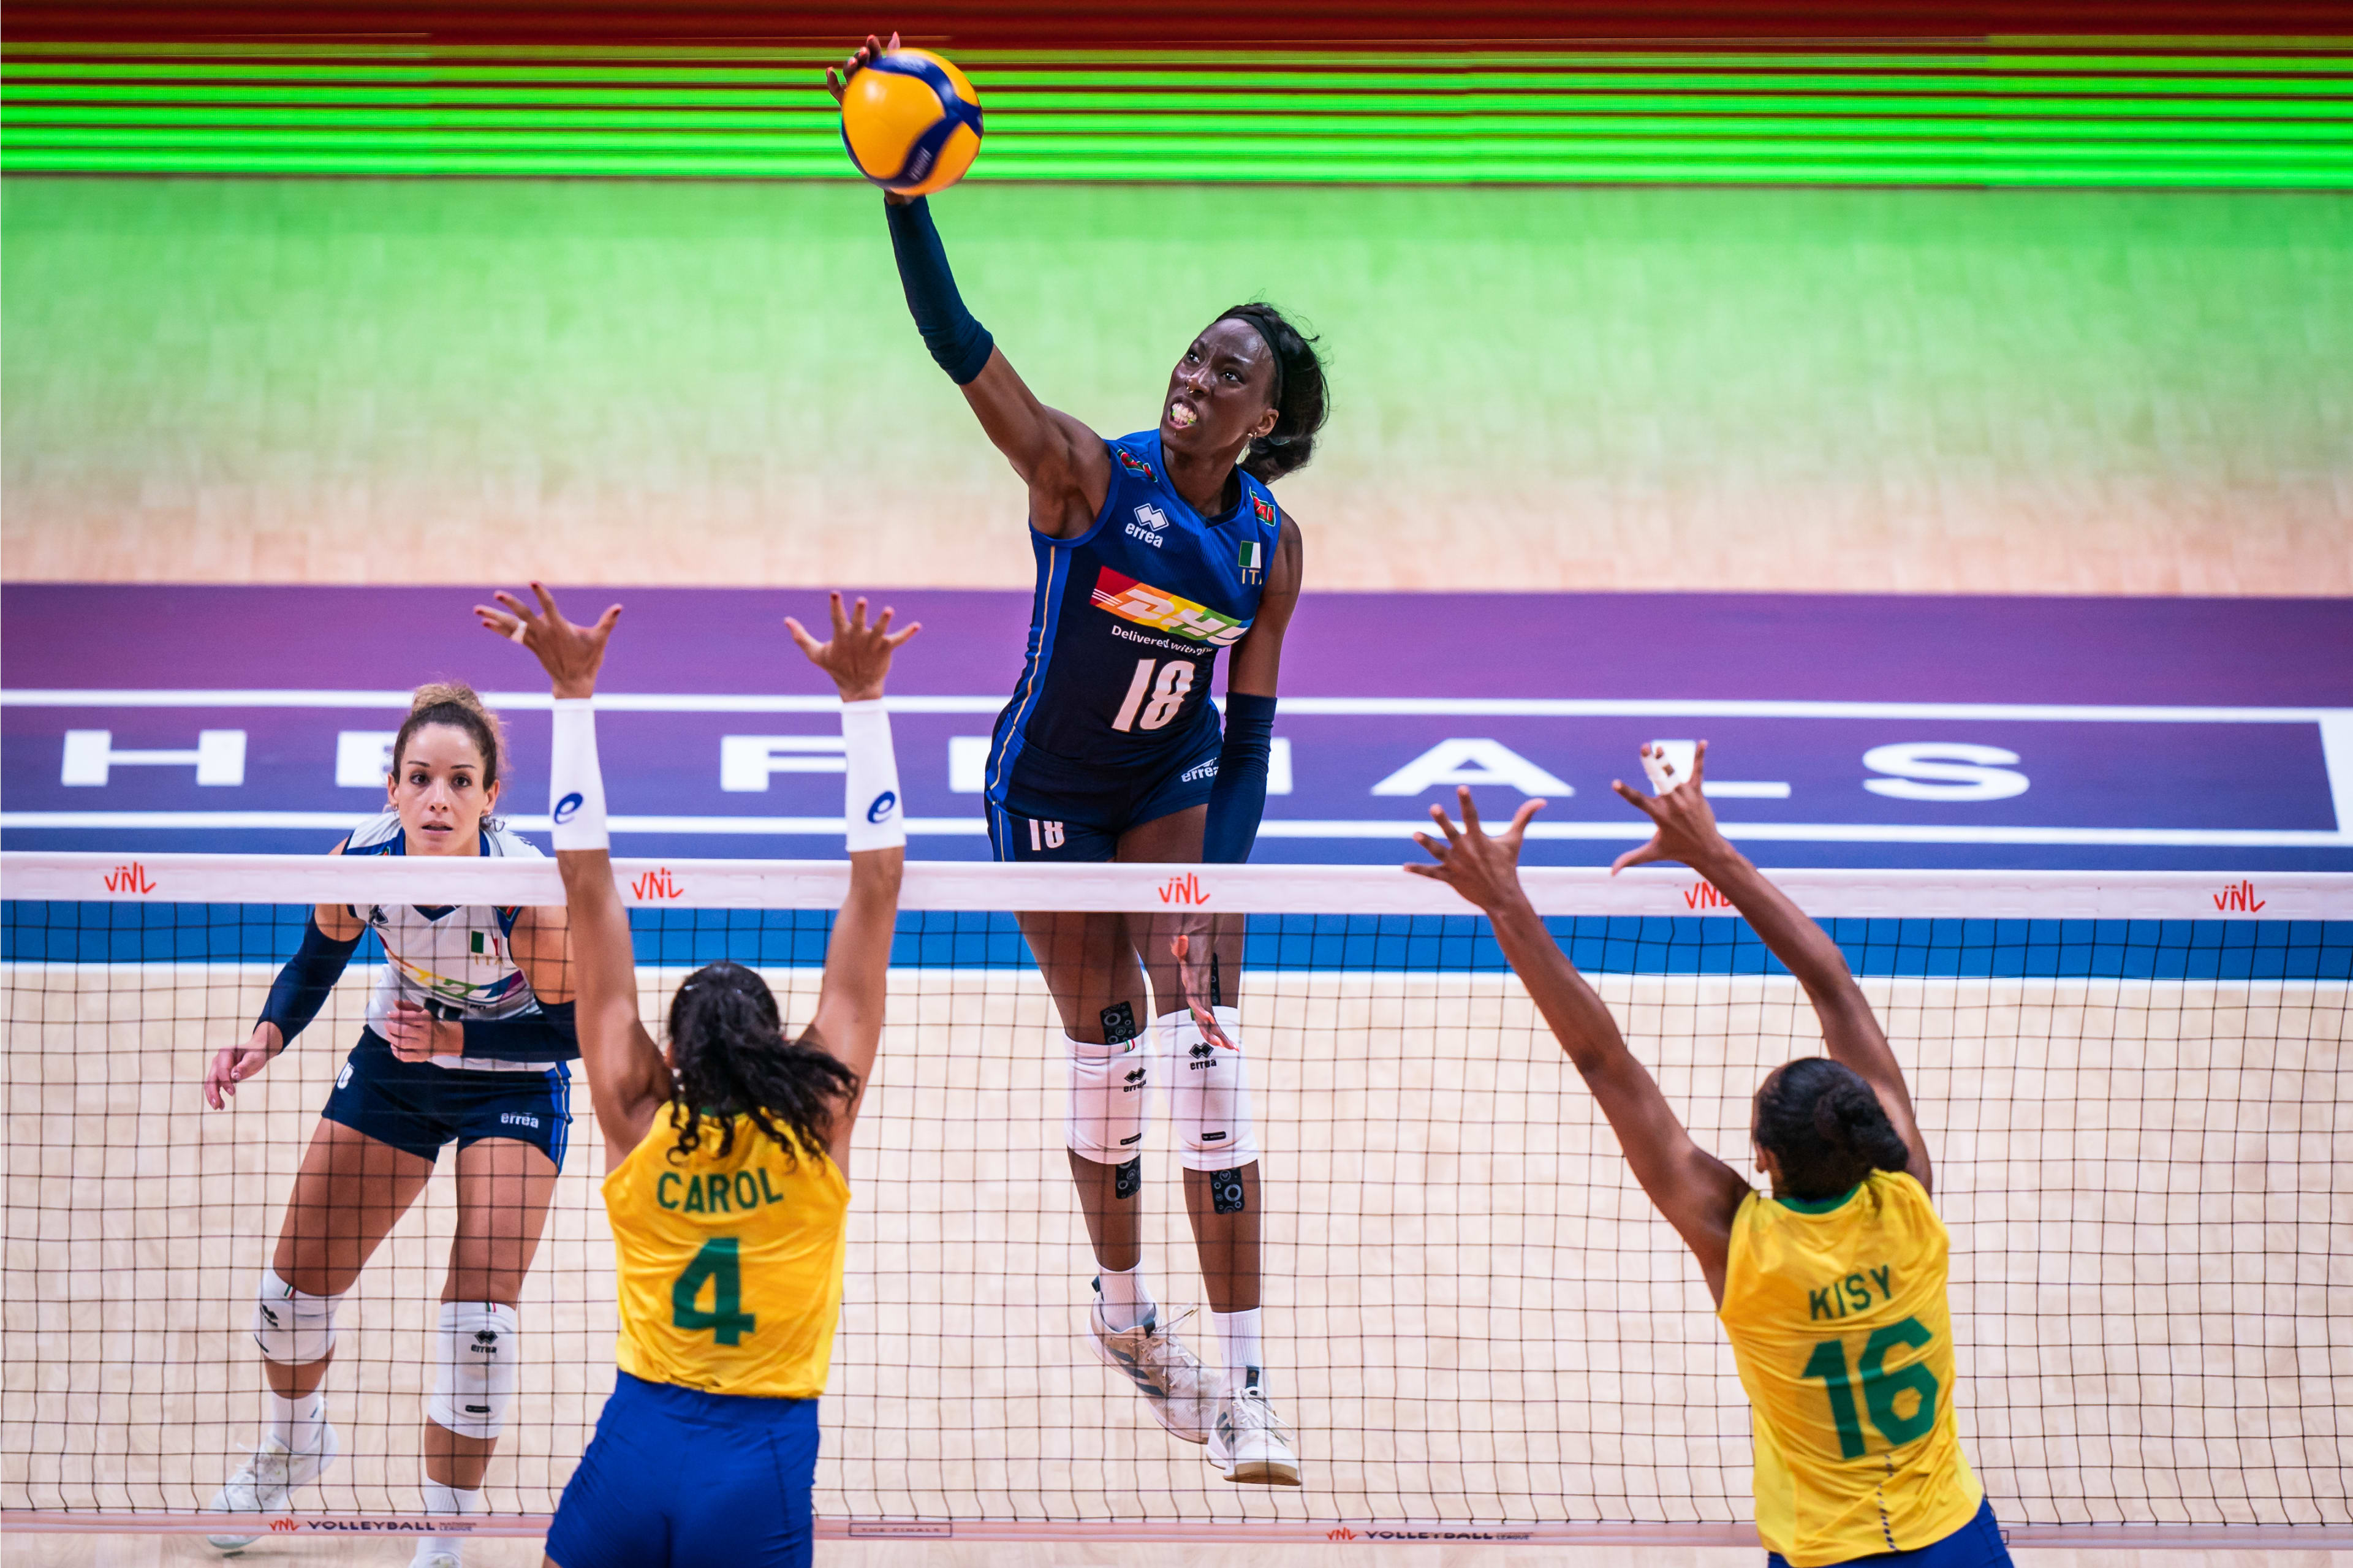 Italy sweep Brazil to triumph as first-time VNL champs volleyballworld